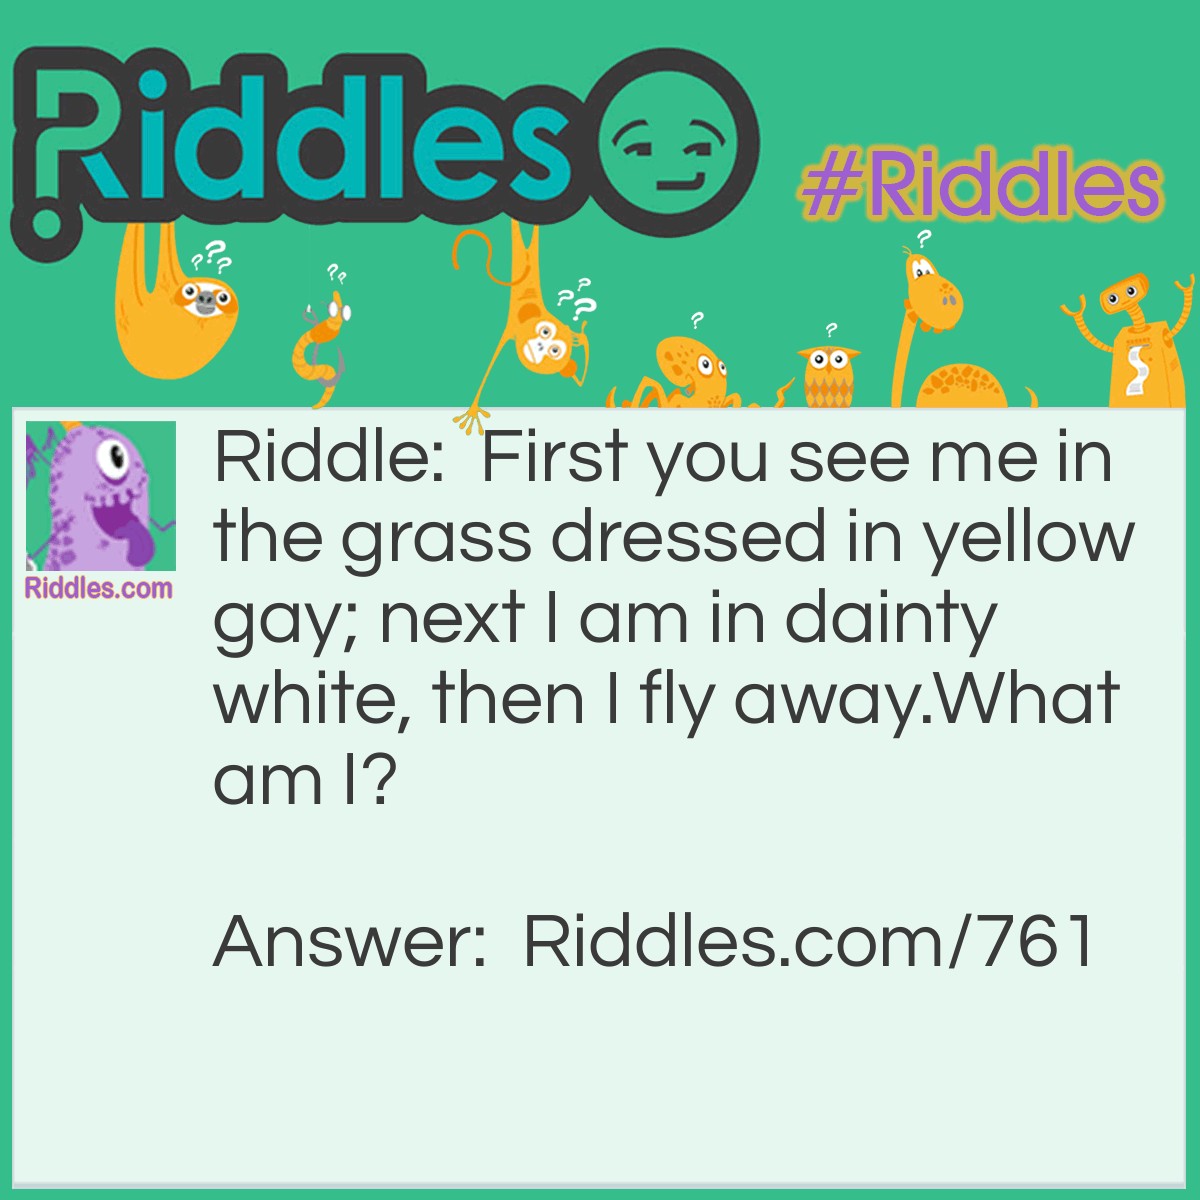 Riddle: First, you see me in the grass dressed in yellow gay; next, I am in dainty white, then I fly away. 
What am I? Answer: I am a Dandelion.